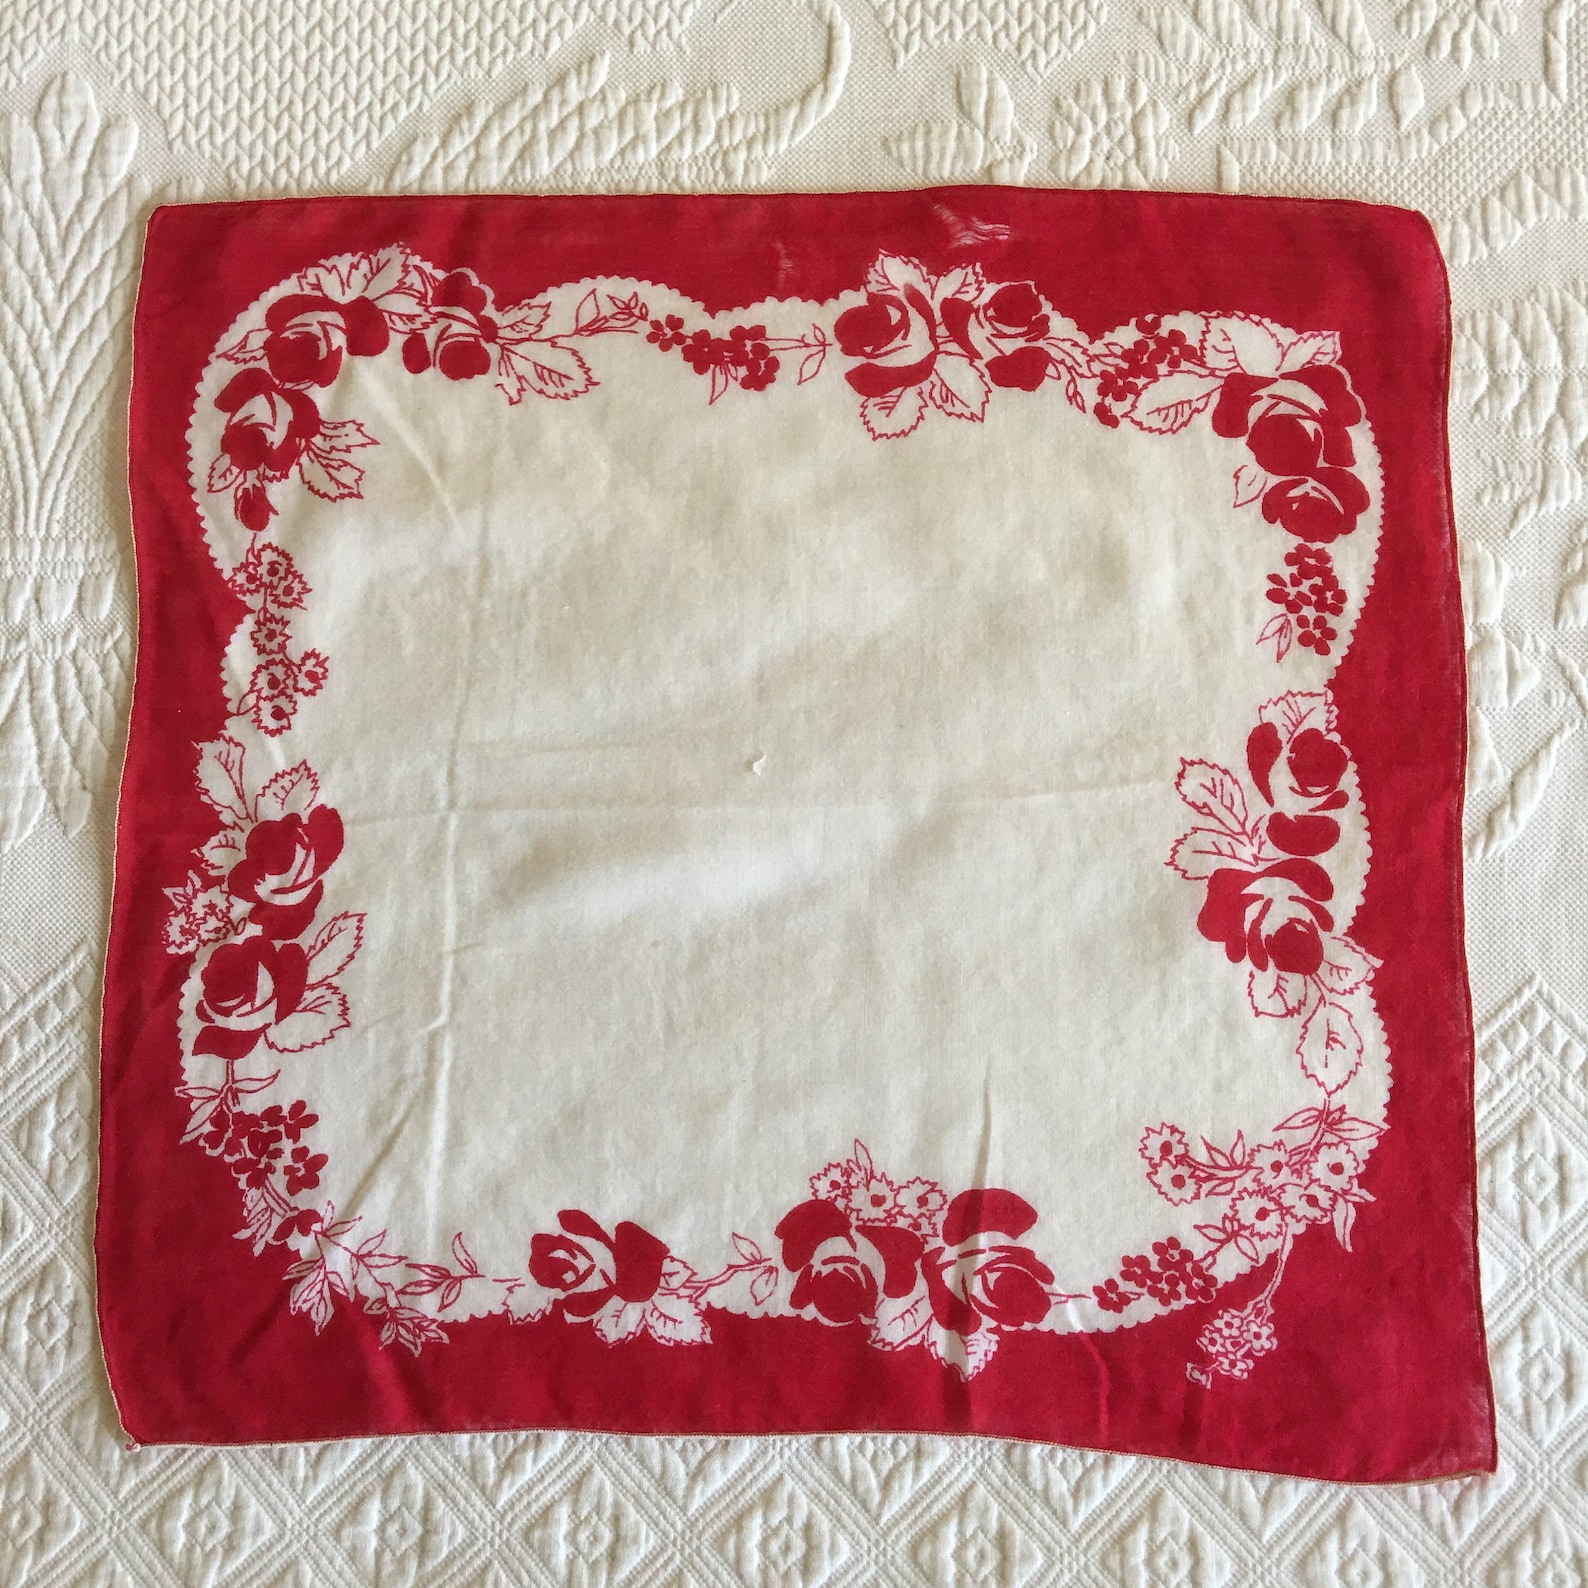 Vintage 6 Handkerchiefs in Coordinating Red and White. - Etsy